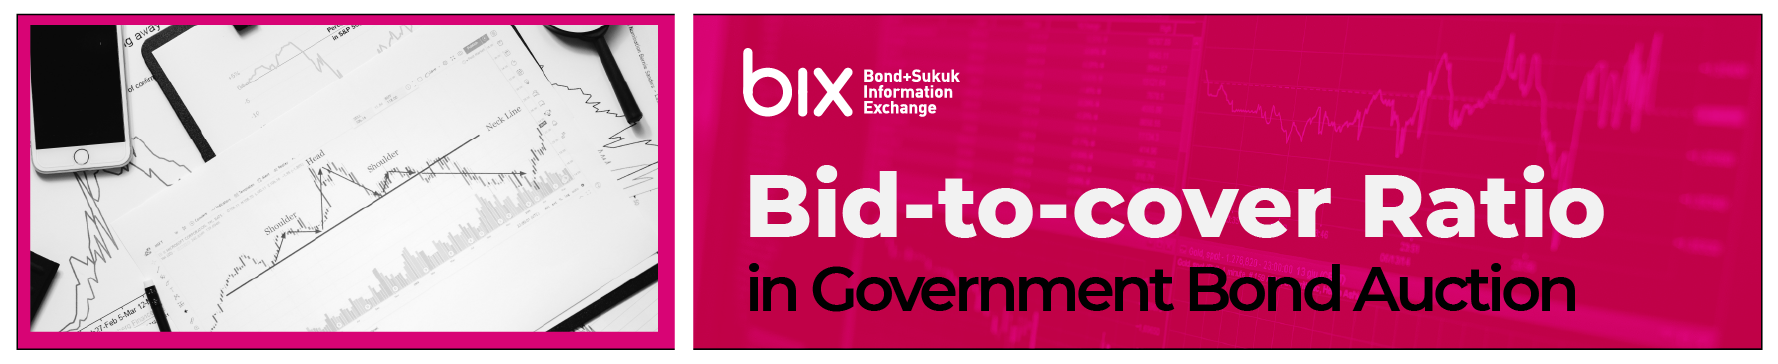 Bid-to-cover Ratio in Government Bond Auction